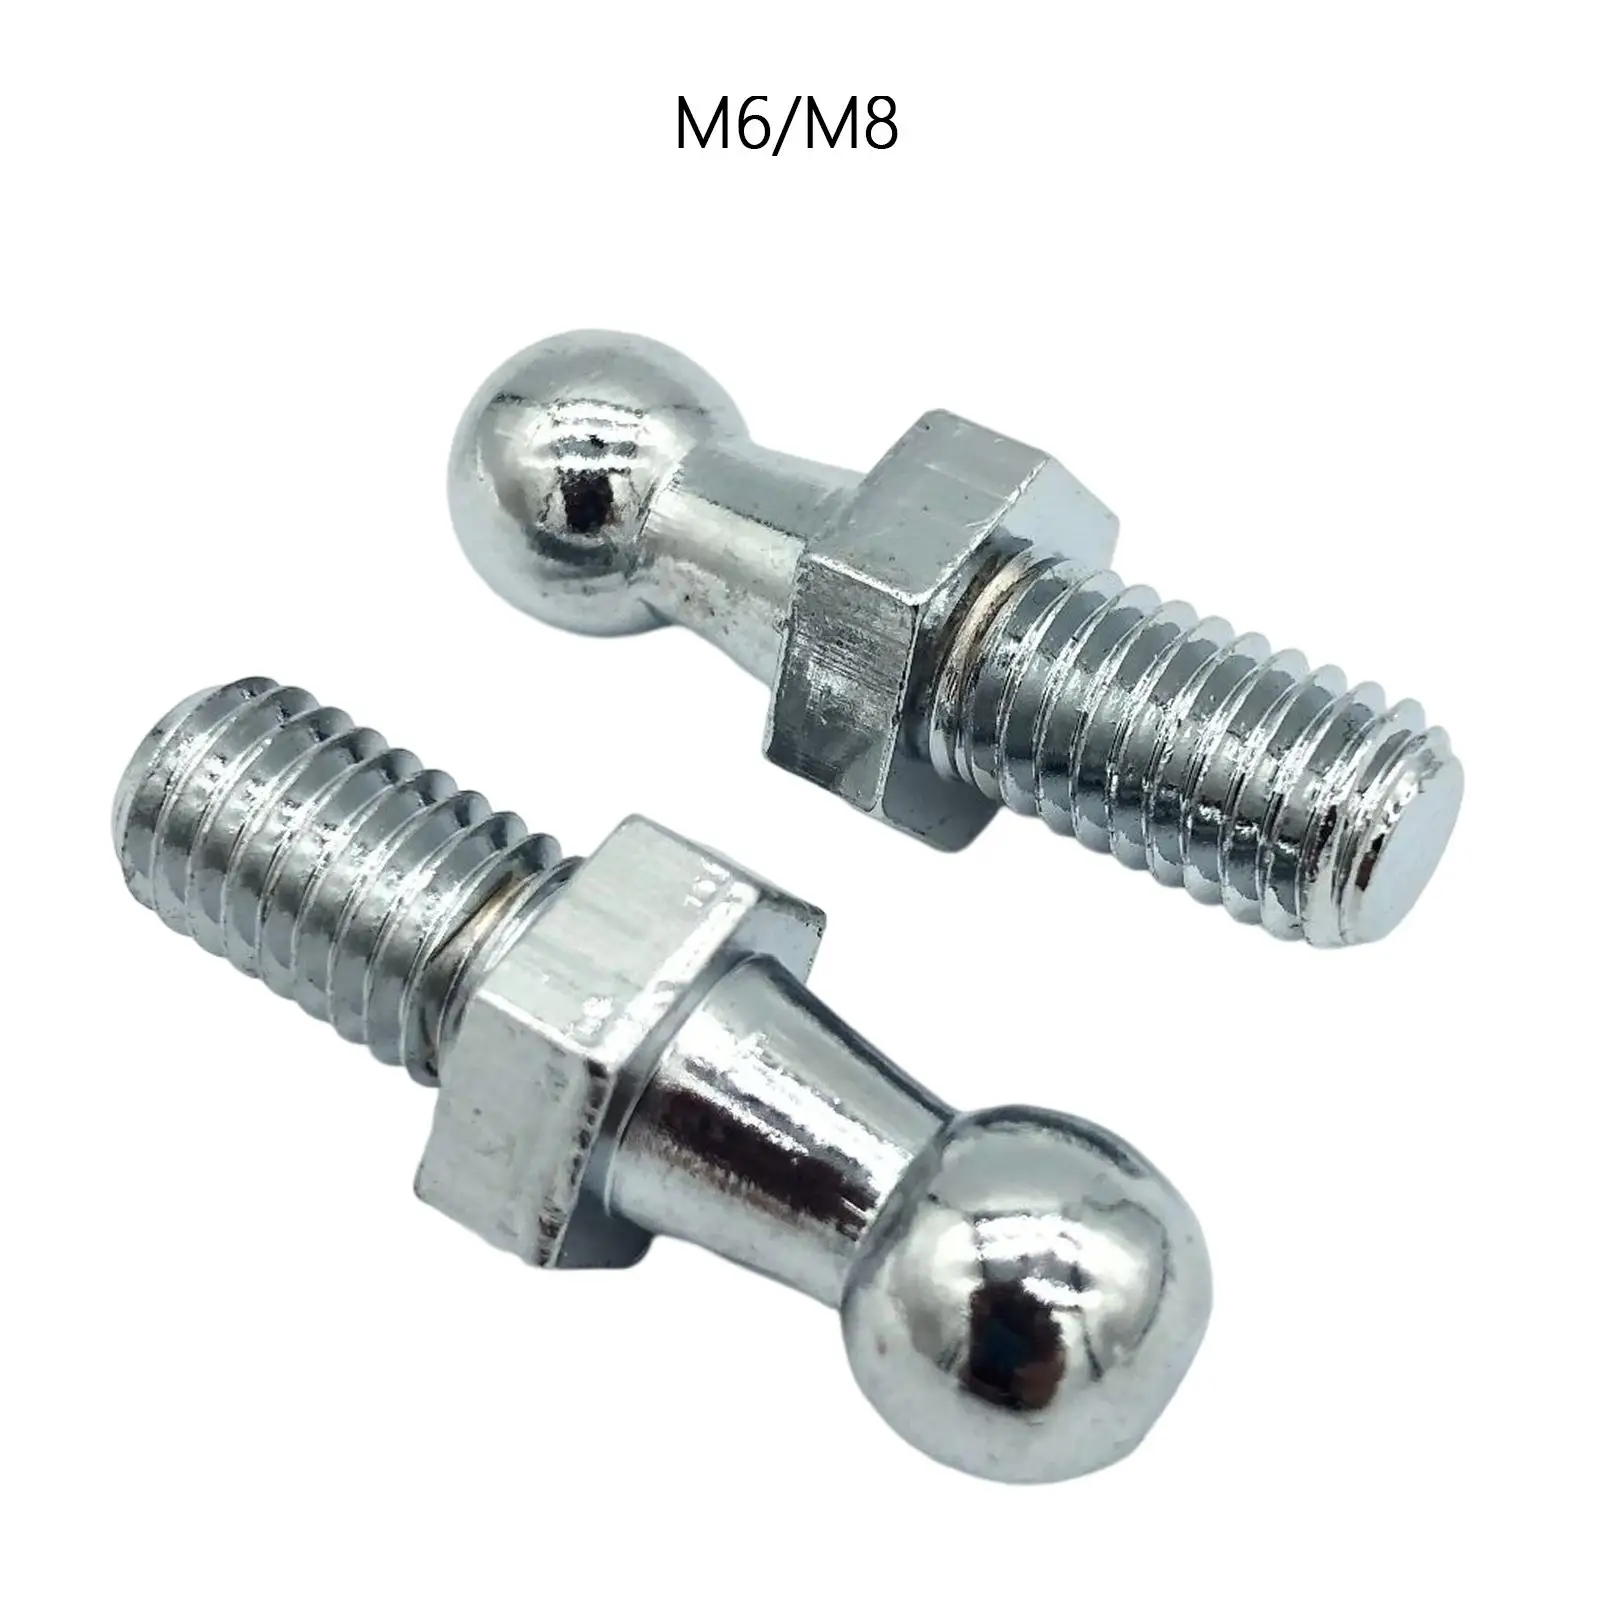 2x Ball Stud Pin Bolt Accessories Easy to Install Replaces M8 M6 10mm Durable